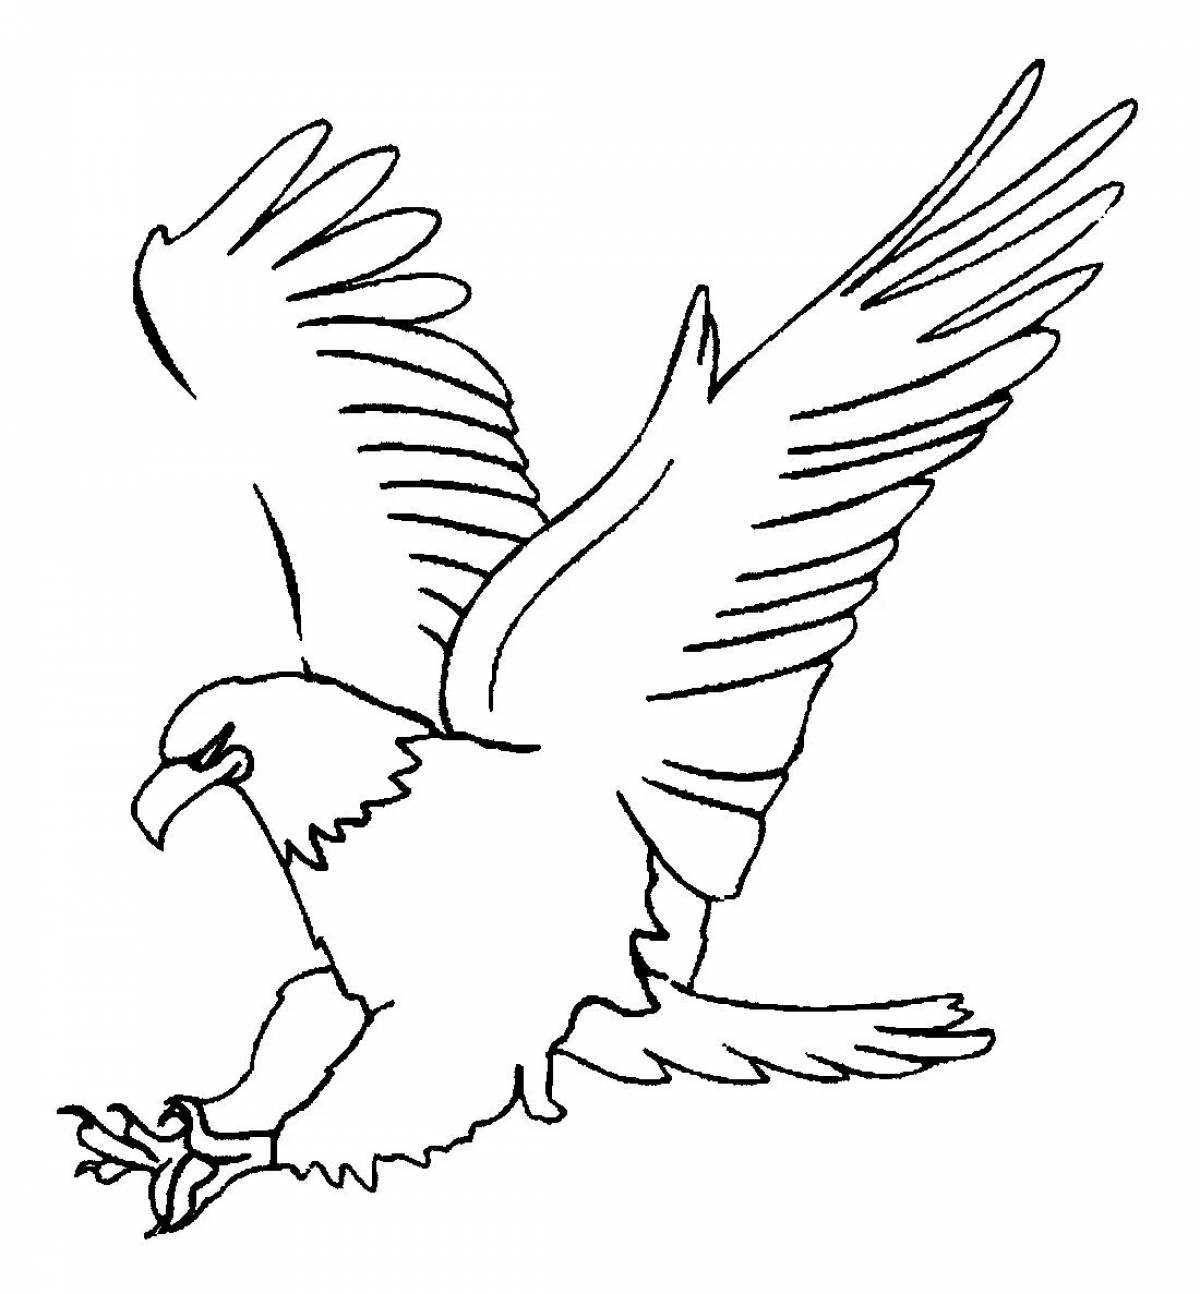 Sparkling kite coloring page